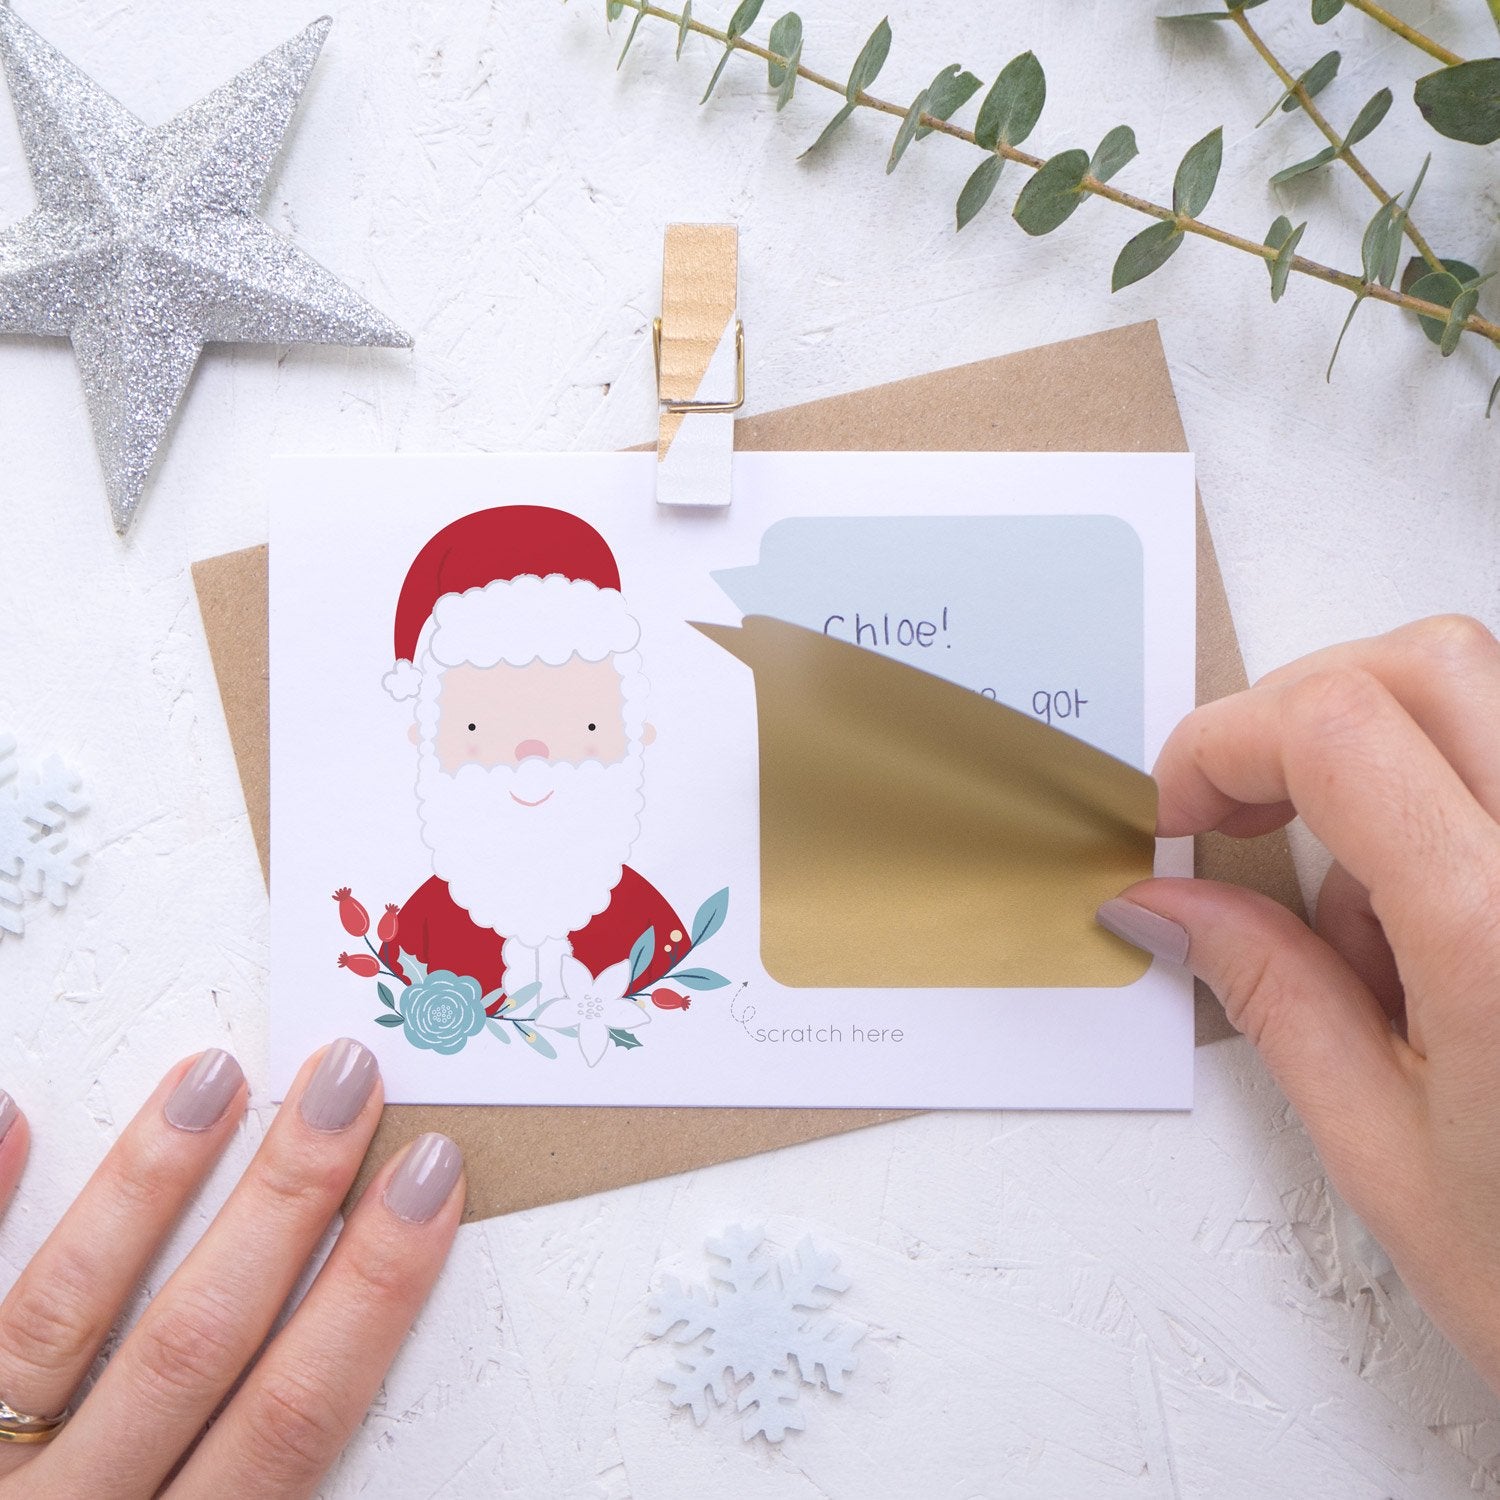 Personalised Santa secret message Christmas scratch card with the gold scratch and reveal panel being applied.